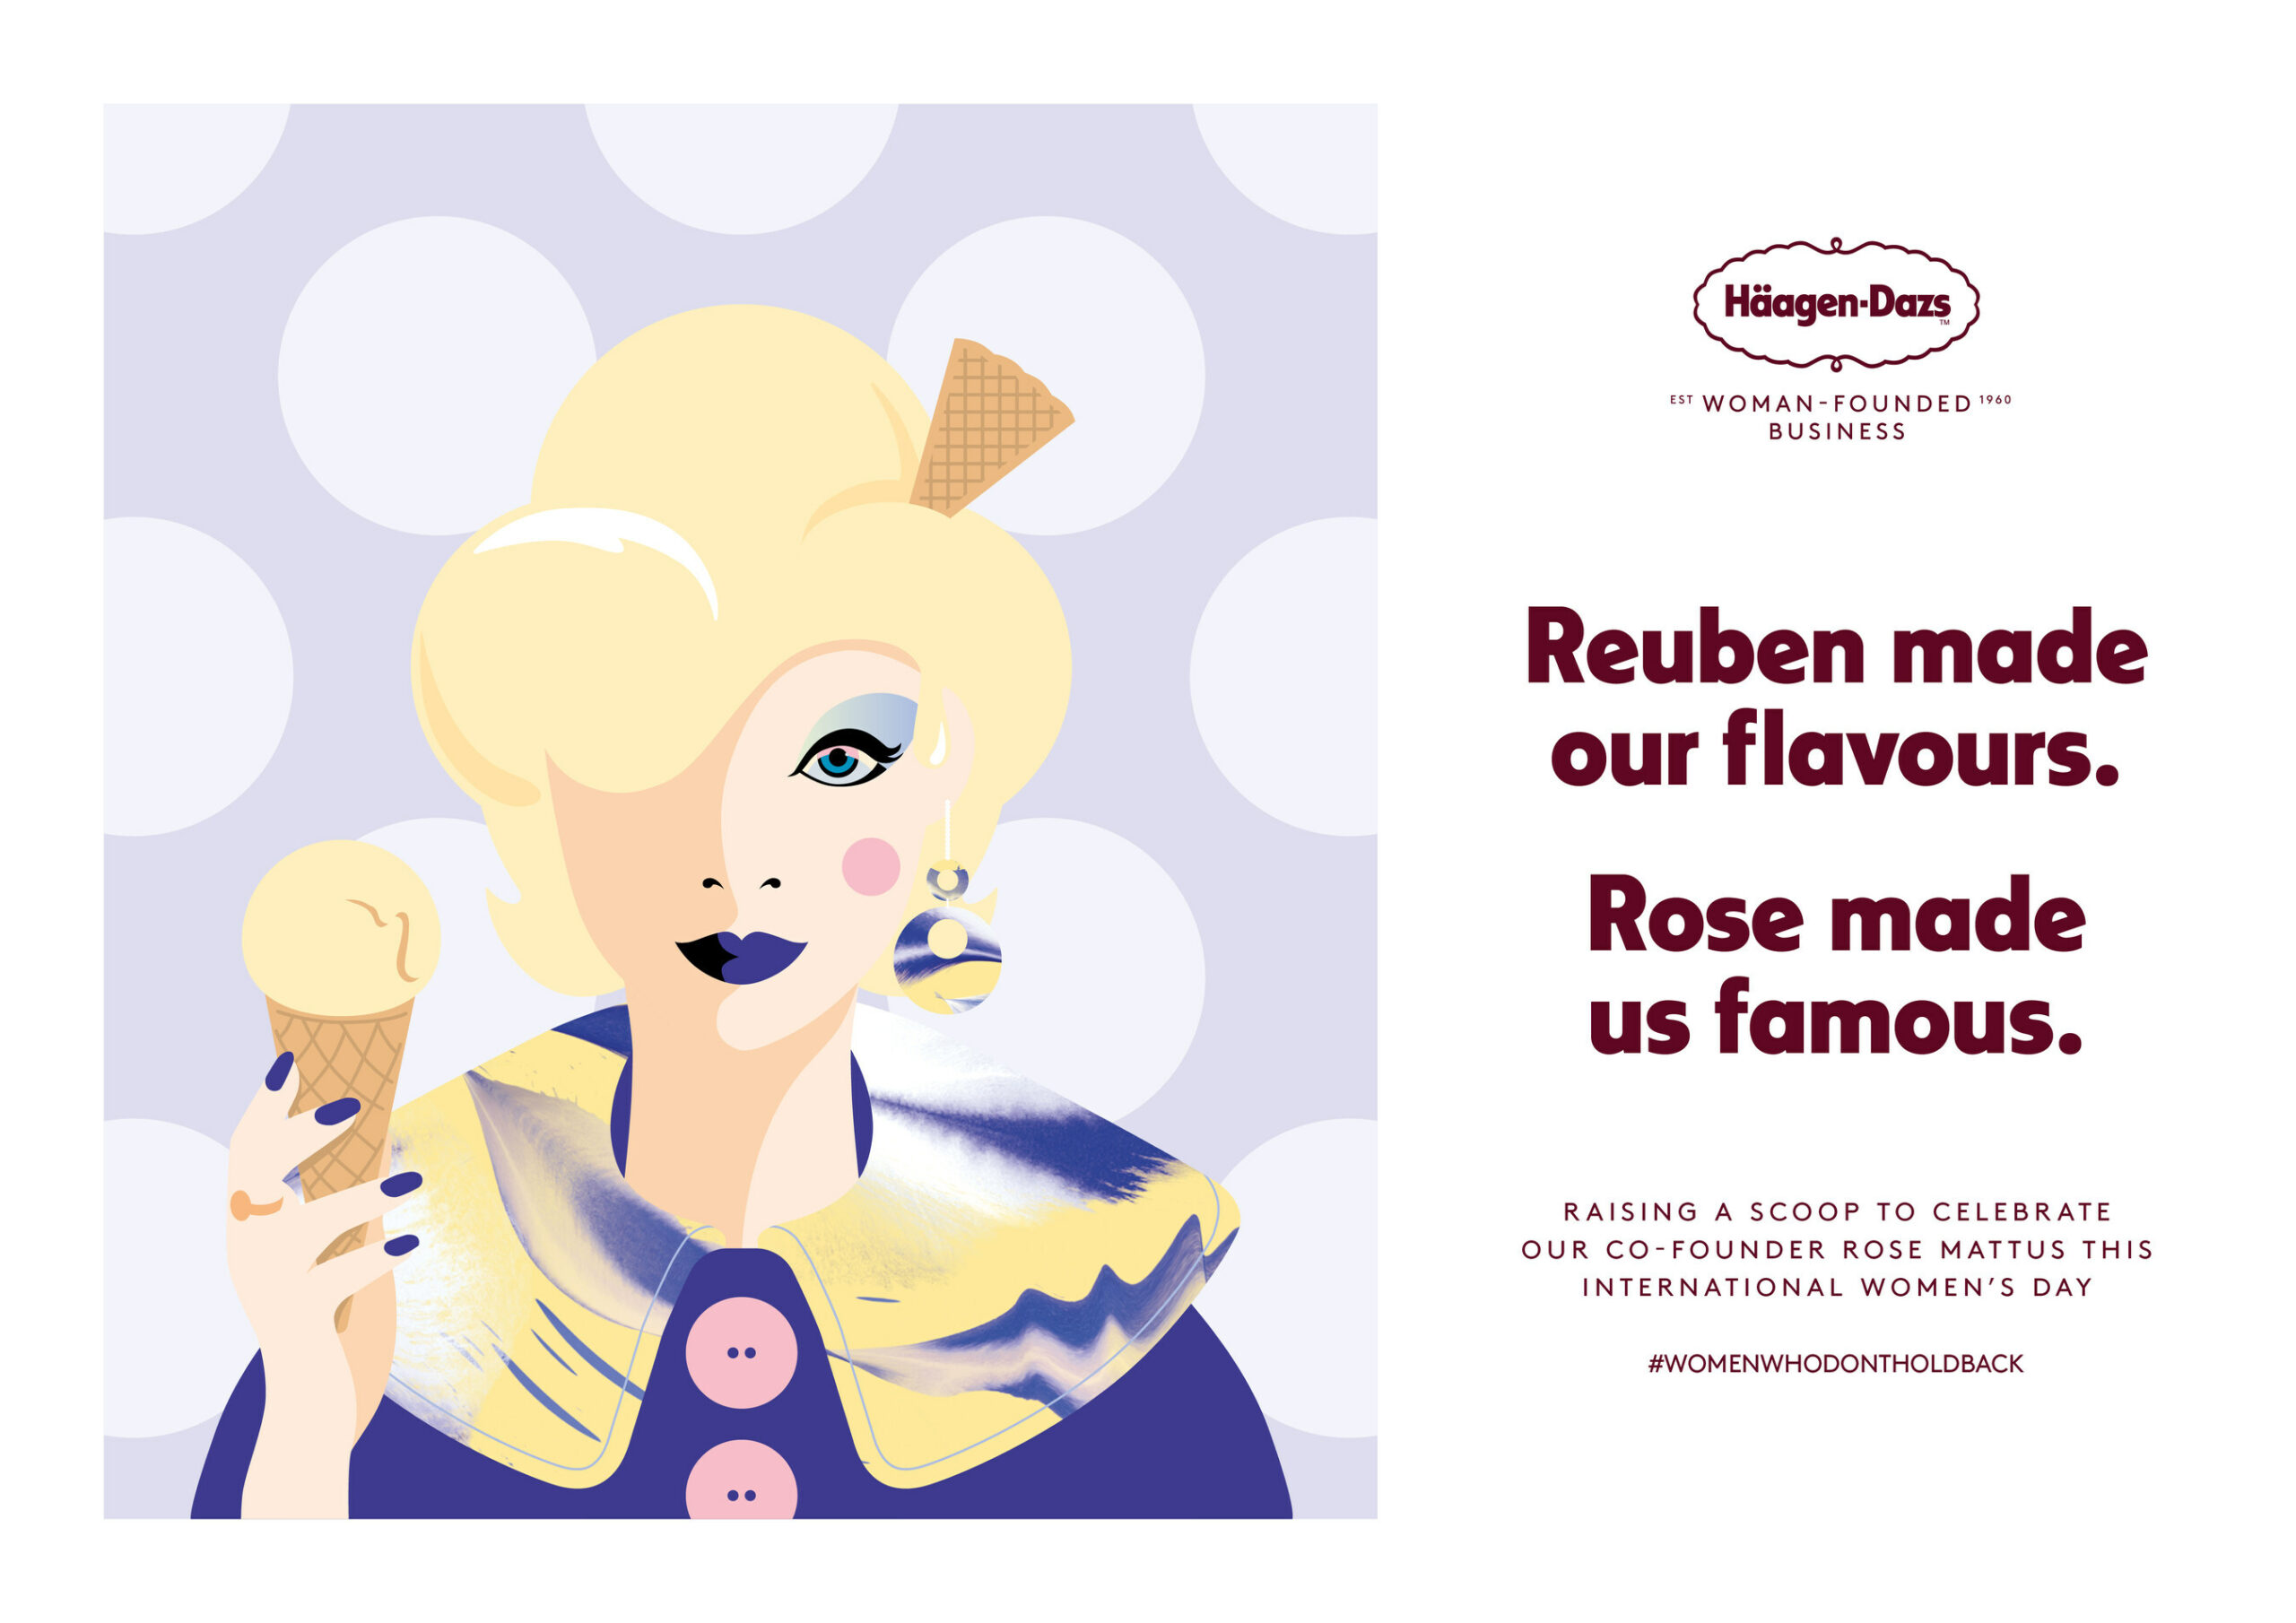 HÄAGEN-DAZS HONOURS THE LEGACY OF ITS UNSUNG FEMALE FOUNDER ON INTERNATIONAL WOMEN’S DAY BY LAUNCHING ‘THE ROSE PROJECT’ AND A ‘FOUNDER’S FAVOURITE’ GIVEAWAY